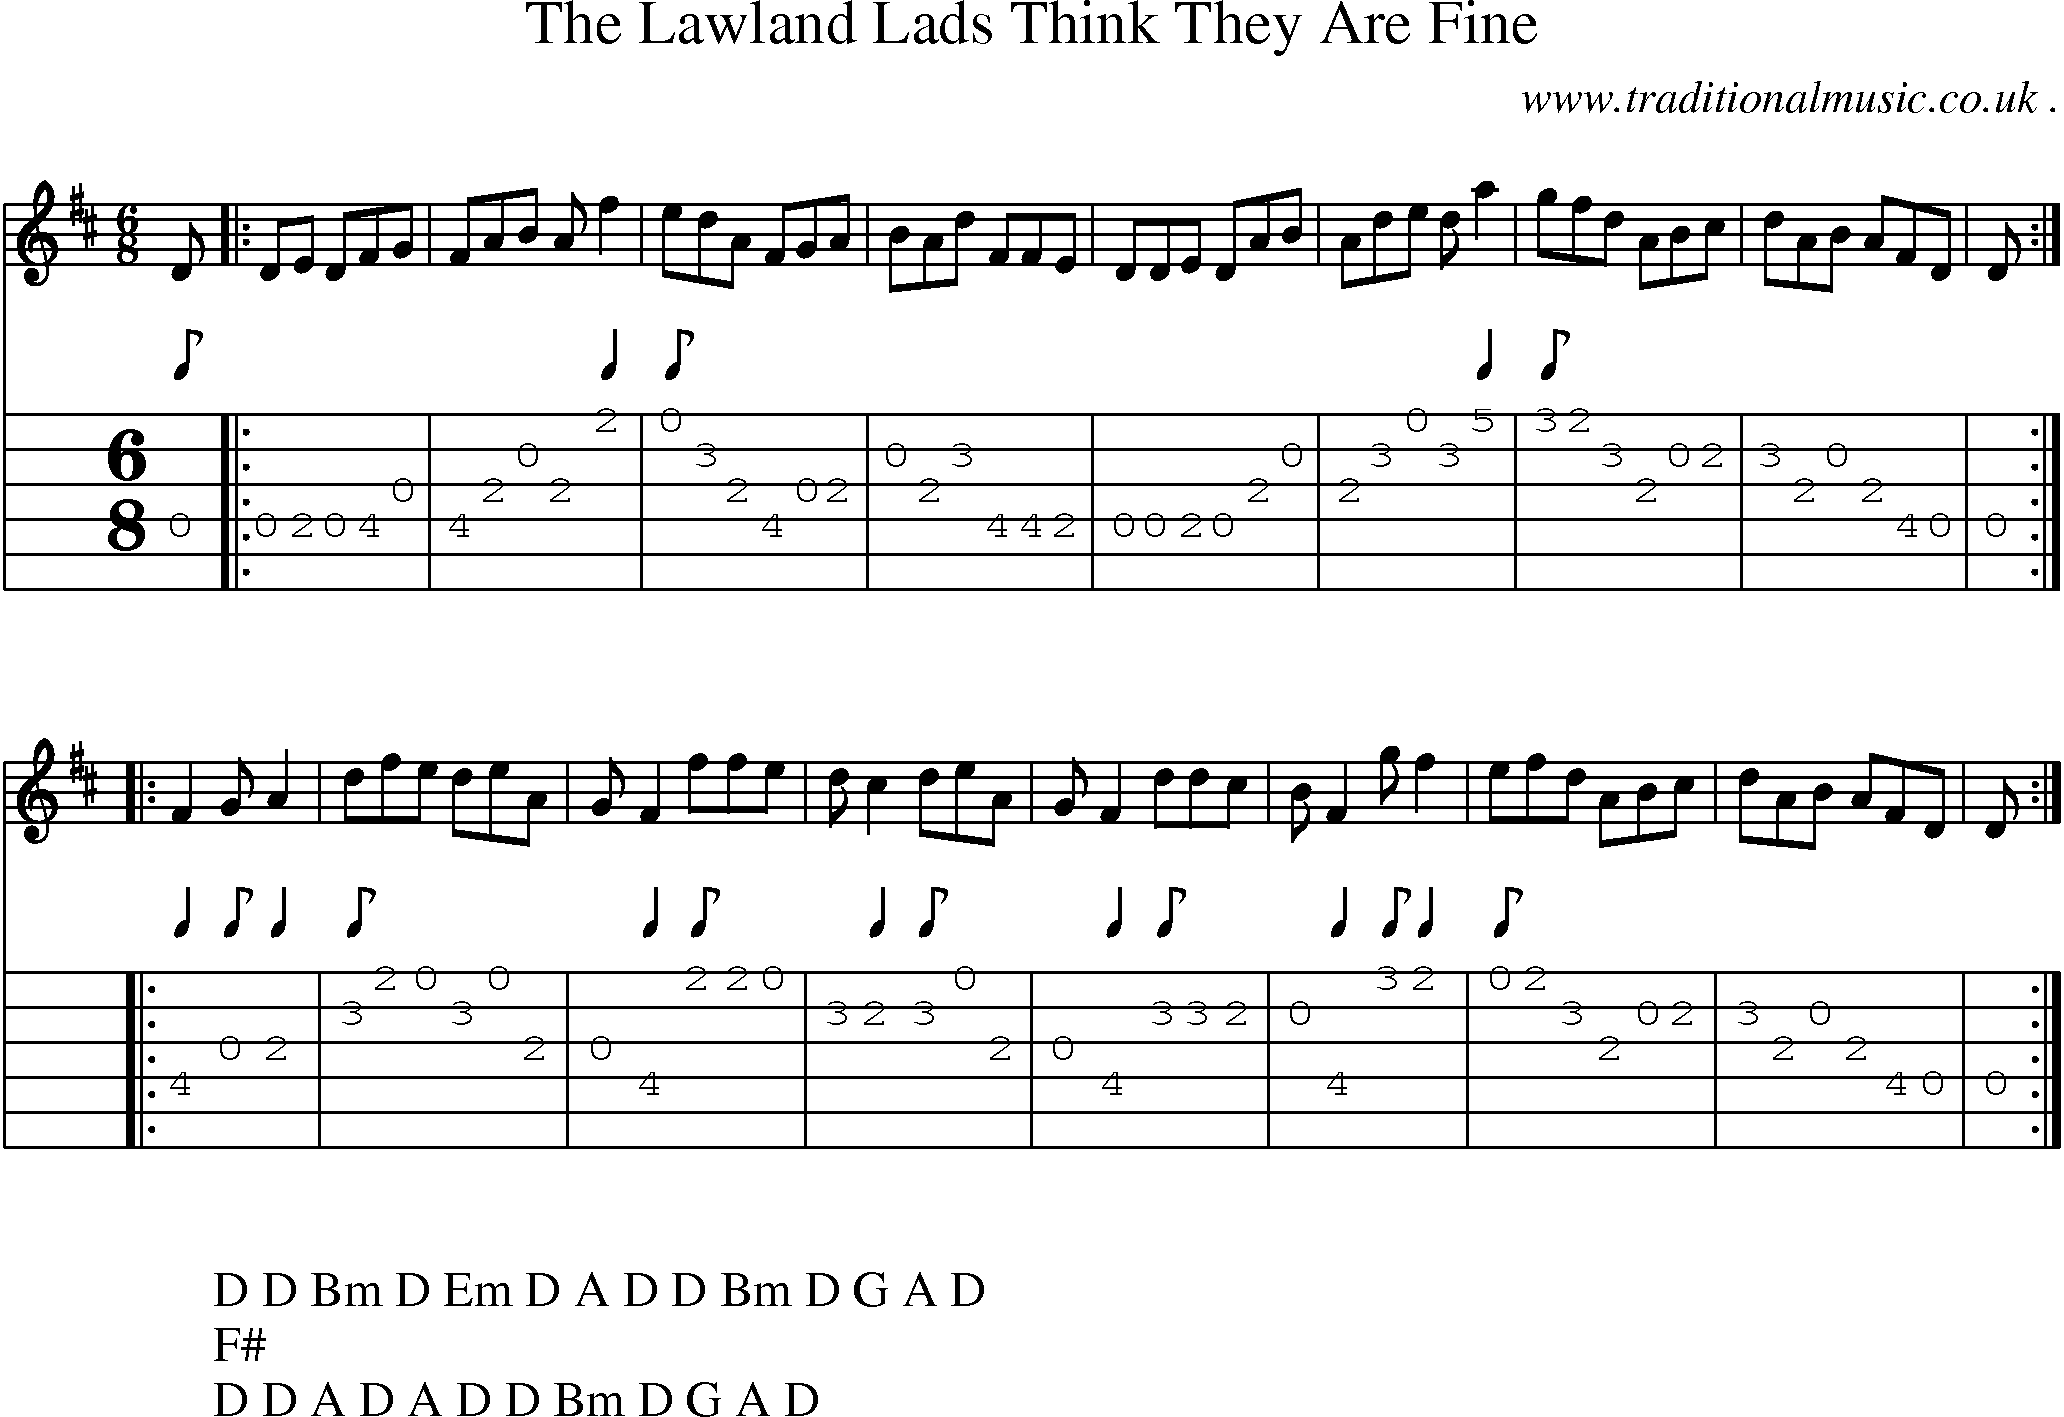 Sheet-Music and Guitar Tabs for The Lawland Lads Think They Are Fine